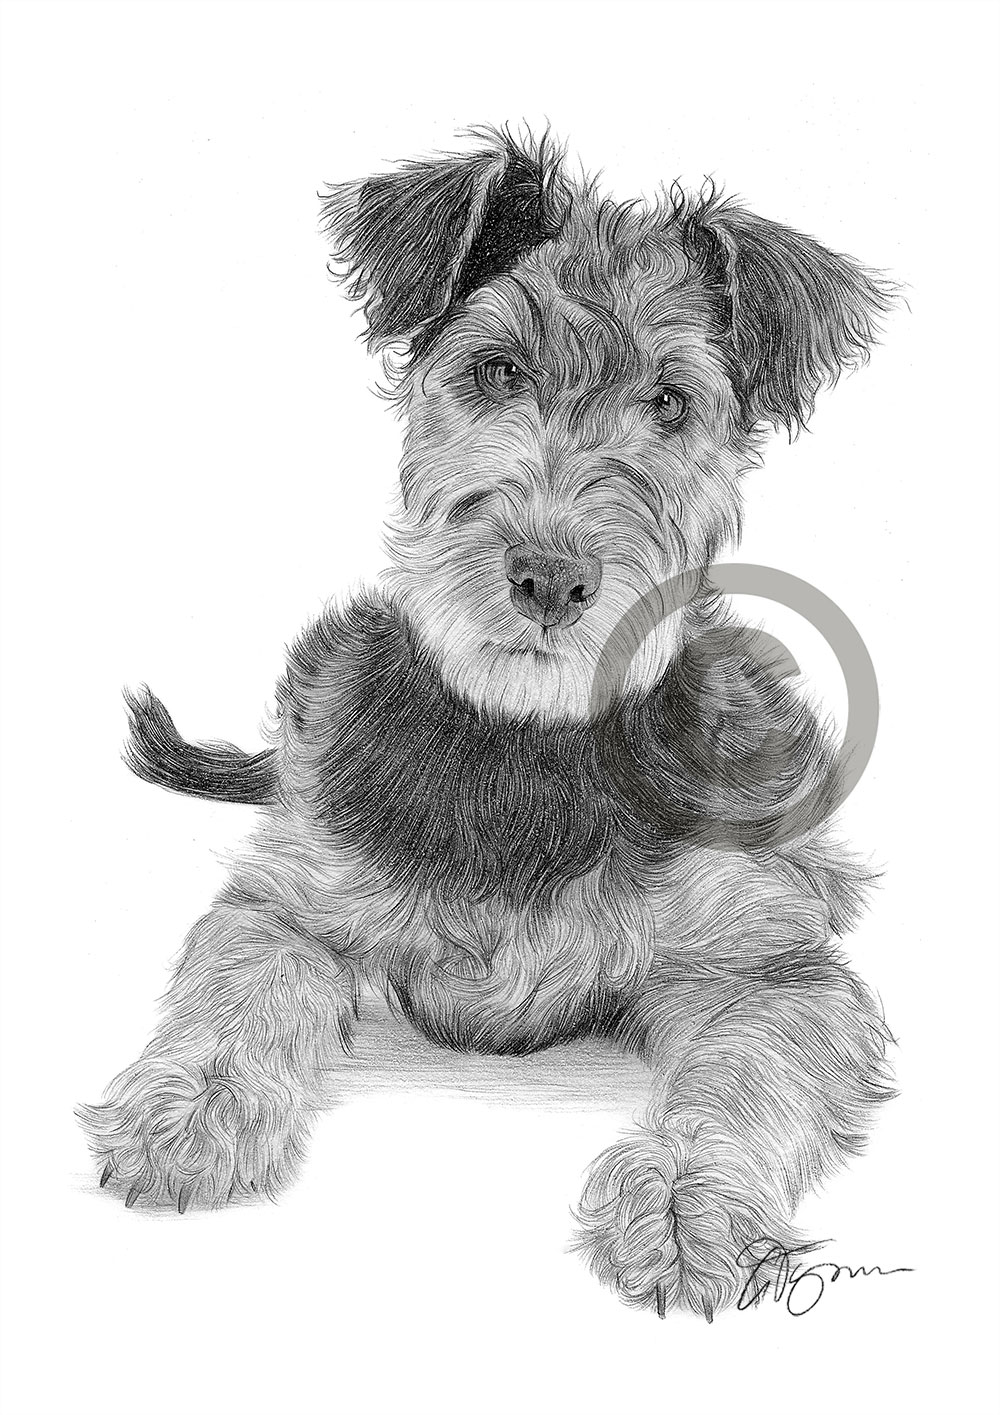 Pencil drawing of an Airedale Terrier puppy by artist Gary Tymon